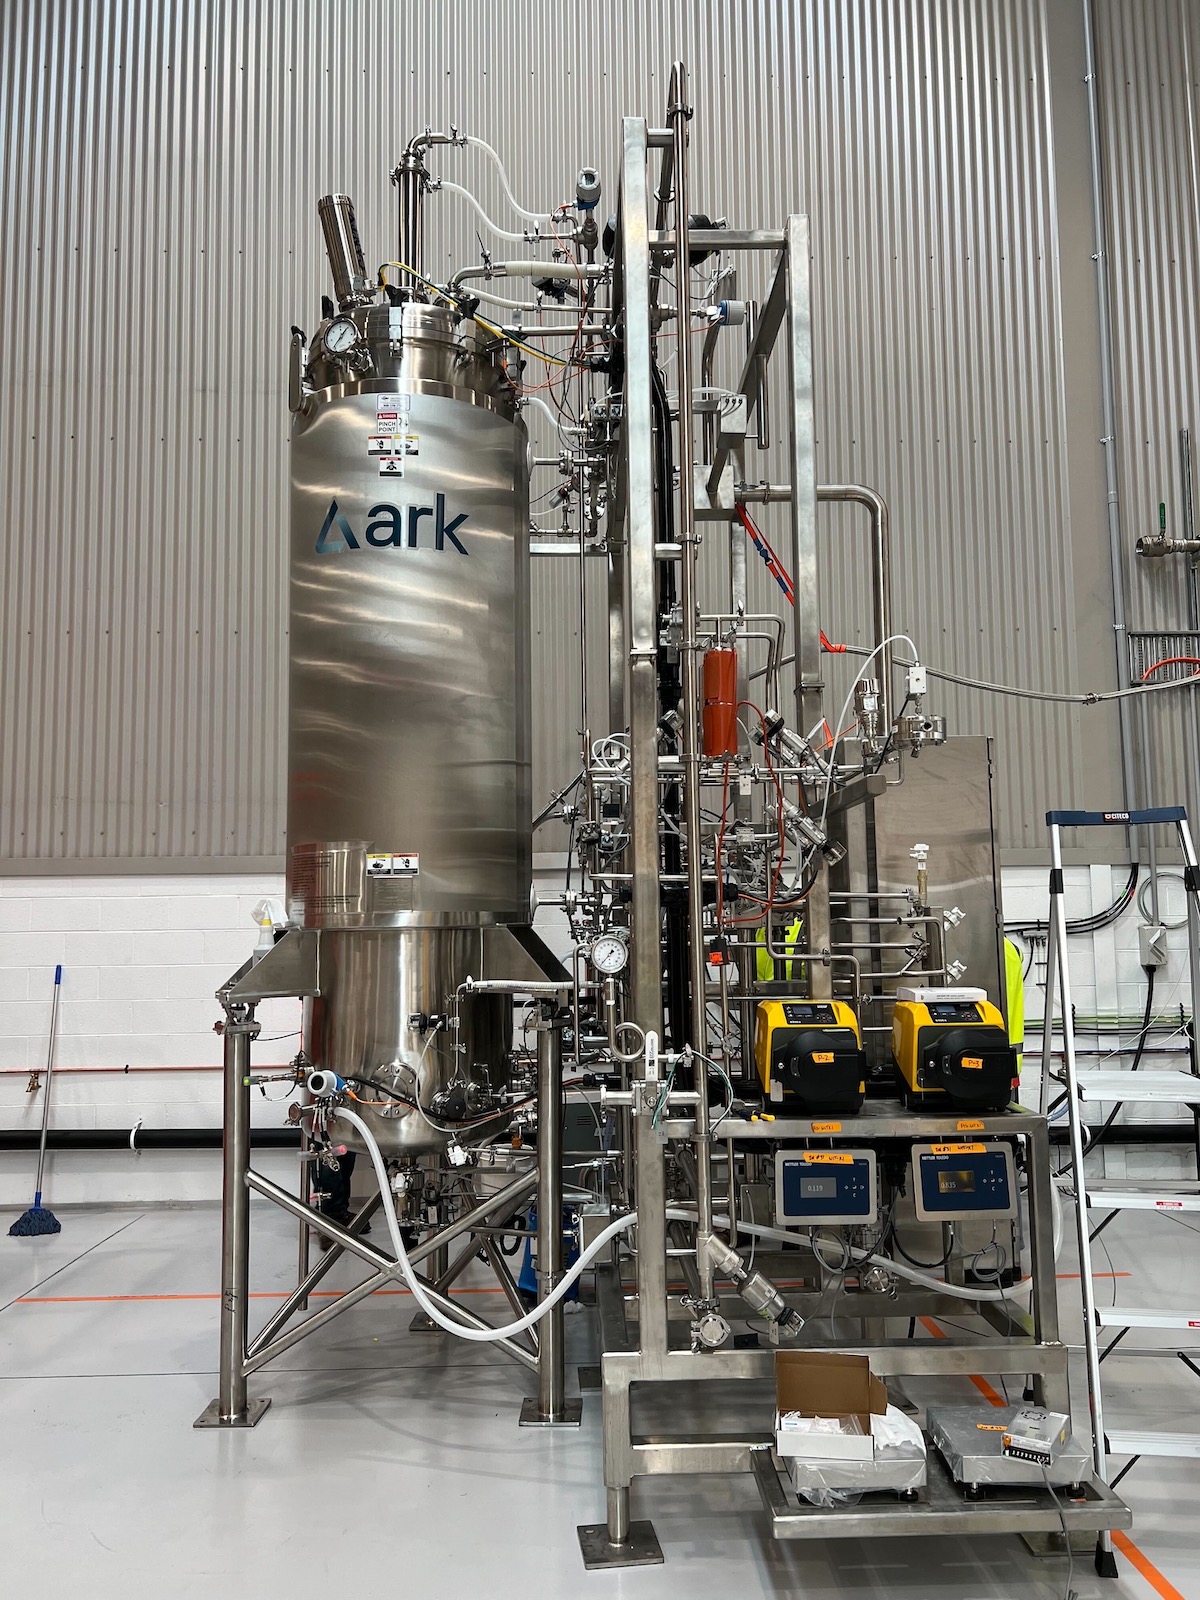 A large stainless steel bioreactor tank for cultivating meat, with various connected pipes and valves in an industrial facility.